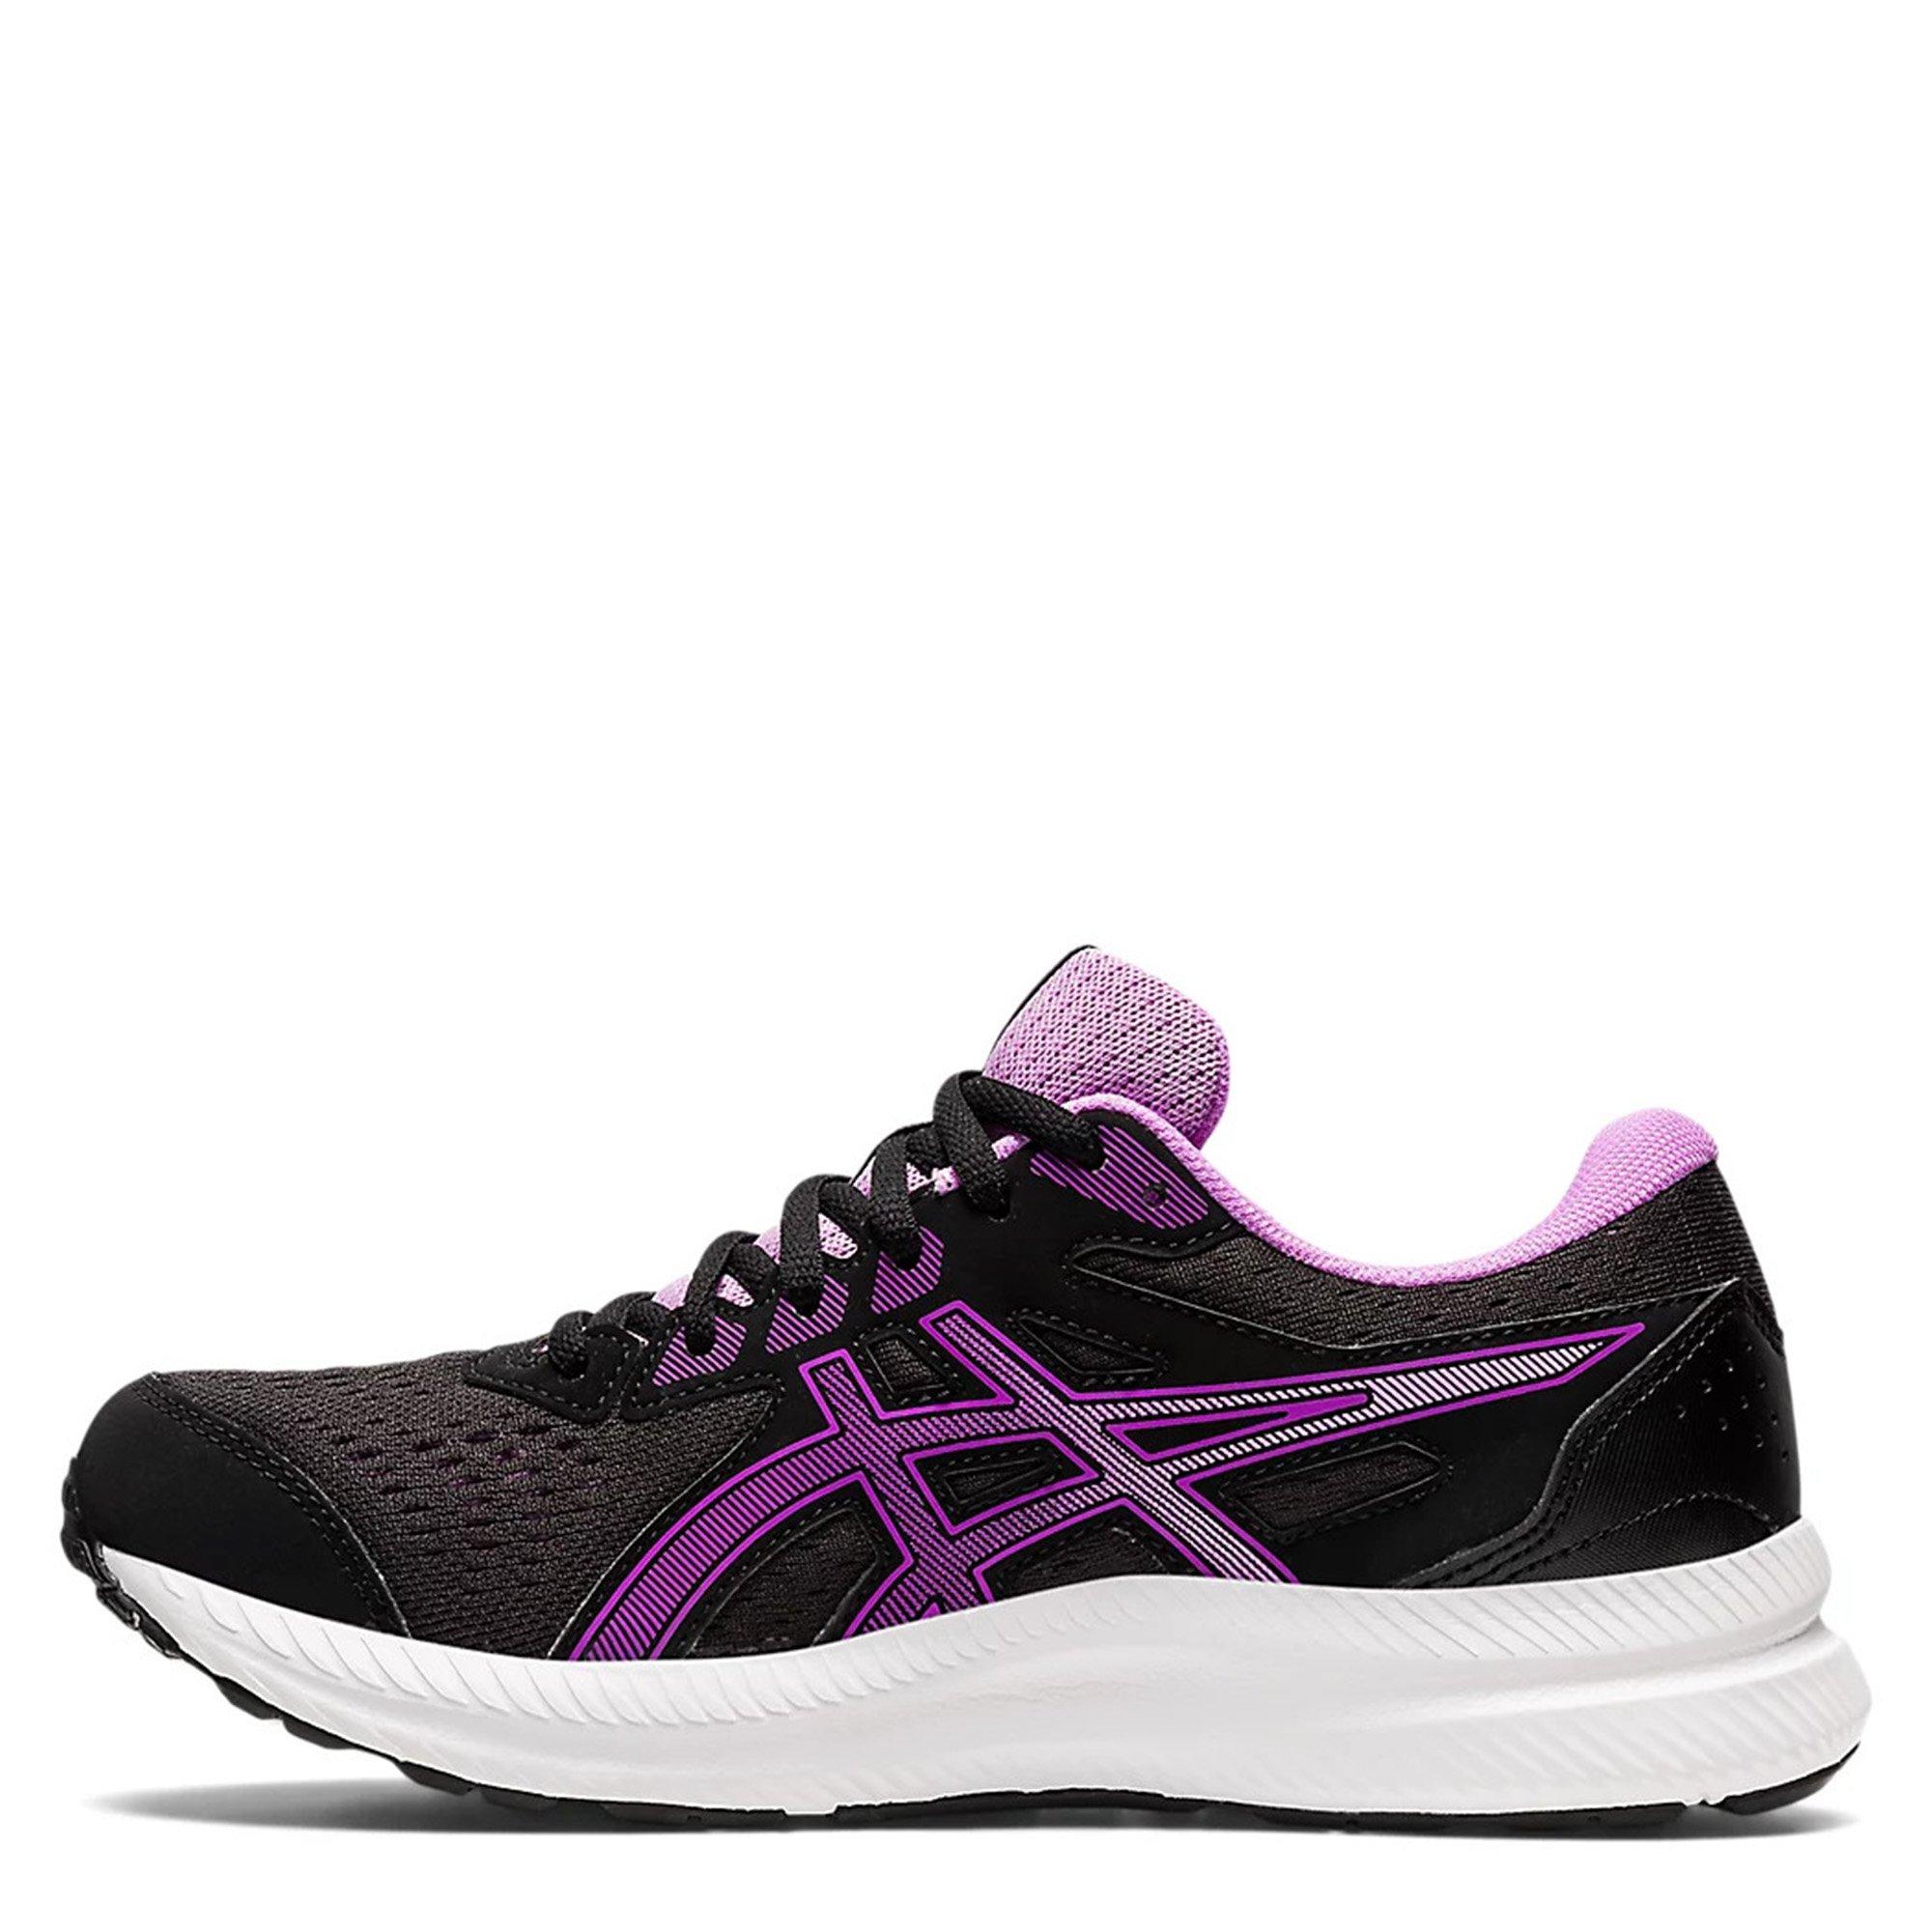 Asics | GEL Contend 8 Womens Running Shoes | Everyday Neutral Road ...